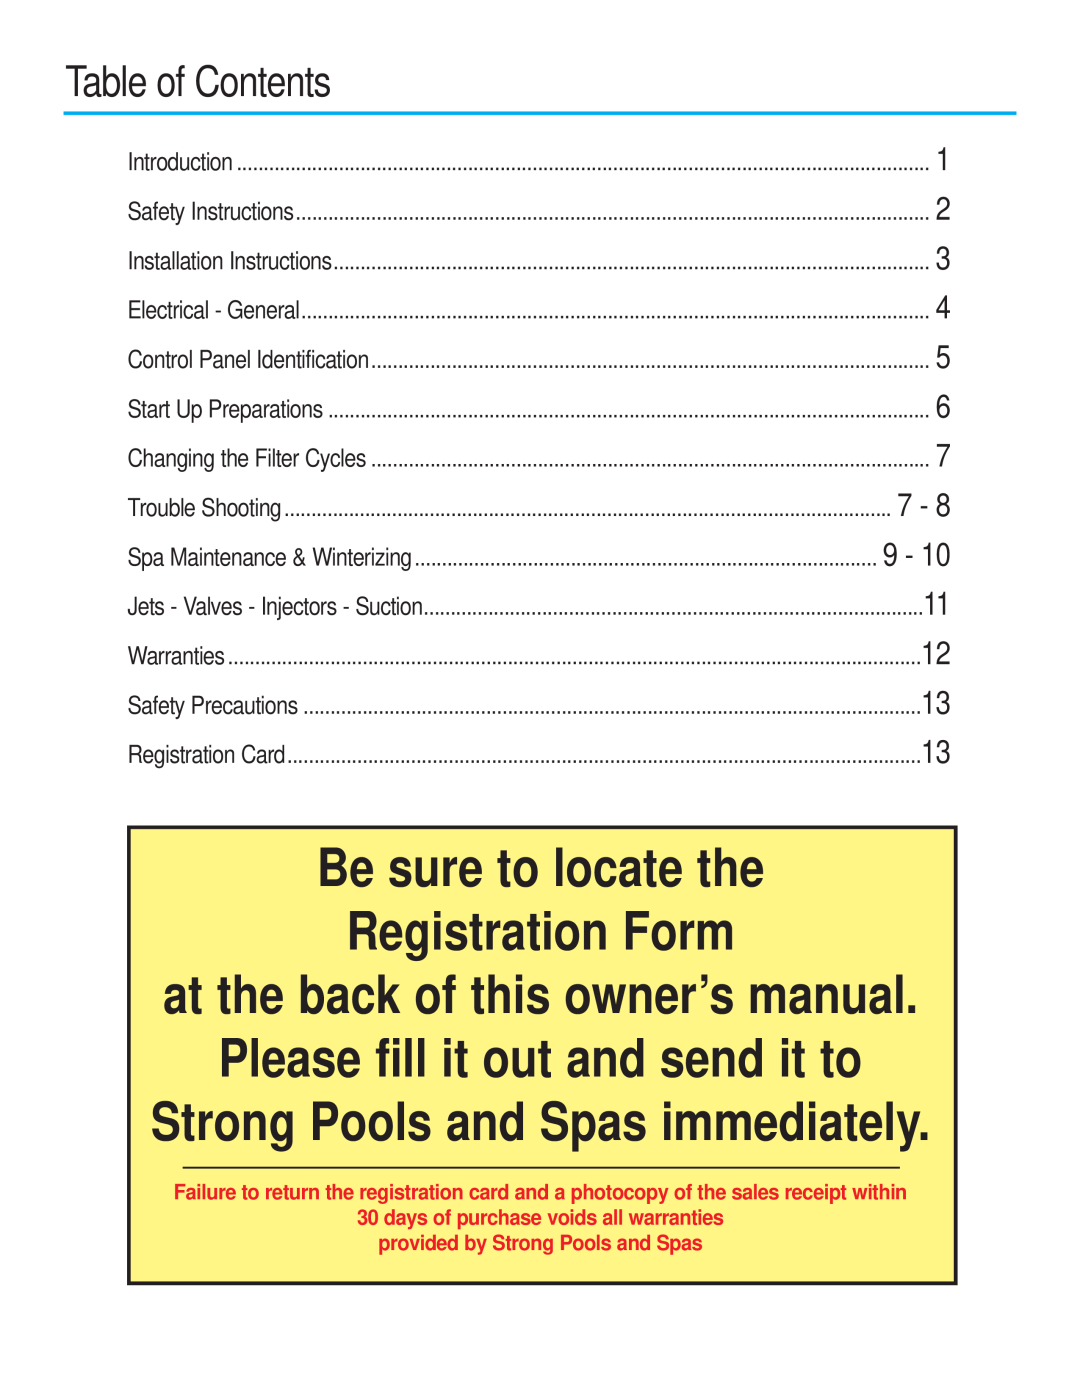 Strong Pools and Spas Strong Spas The Antigua owner manual Table of Contents, Be sure to locate the Registration Form 